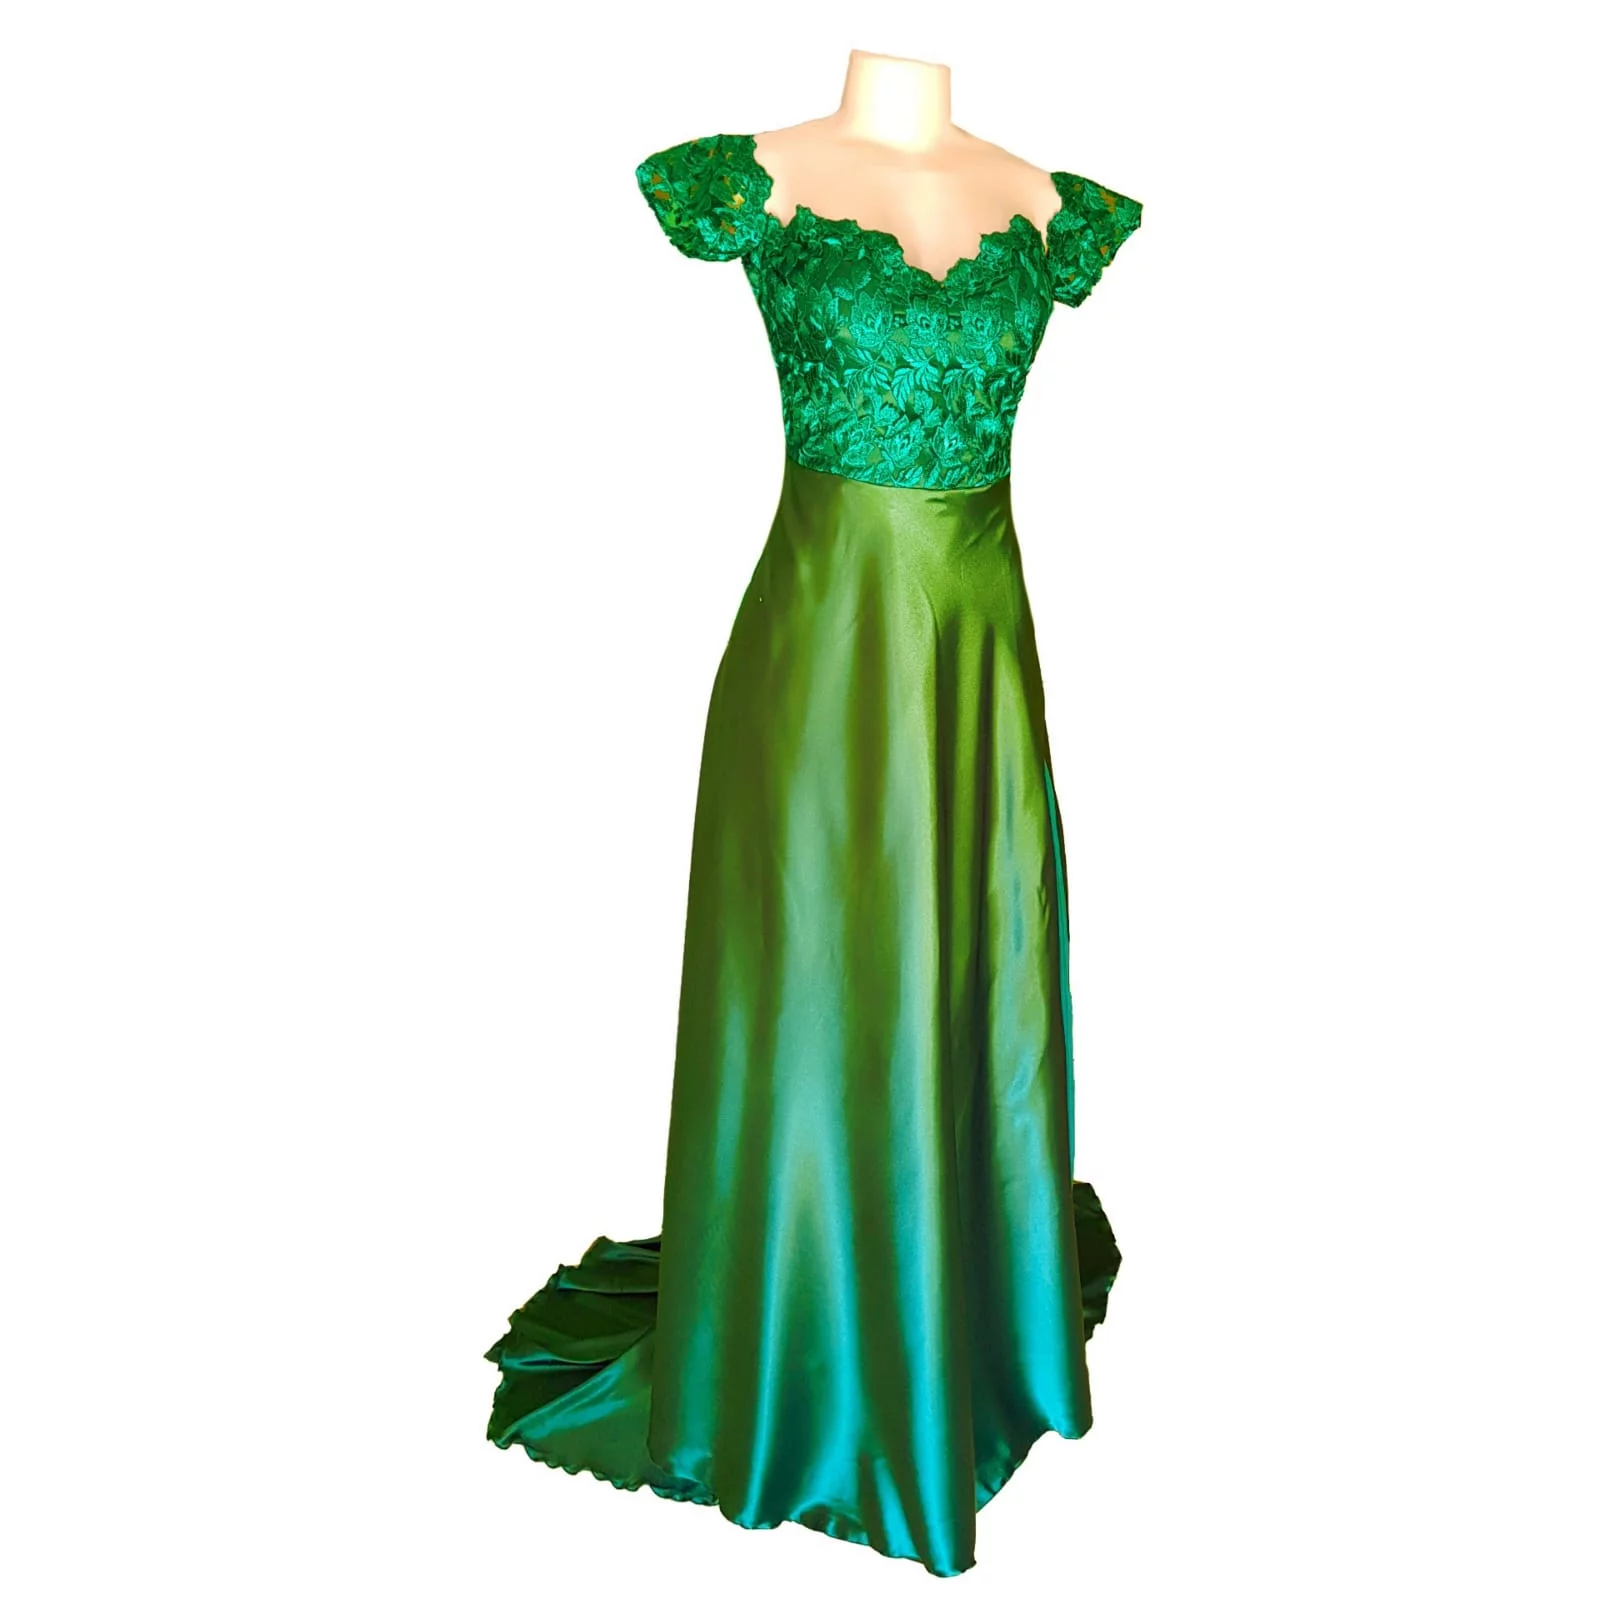 Emerald green satin and lace off shoulder matric farewell dress 1 emerald green satin and lace off shoulder matric farewell dress with a slit and a train and off shoulder cap sleeves.